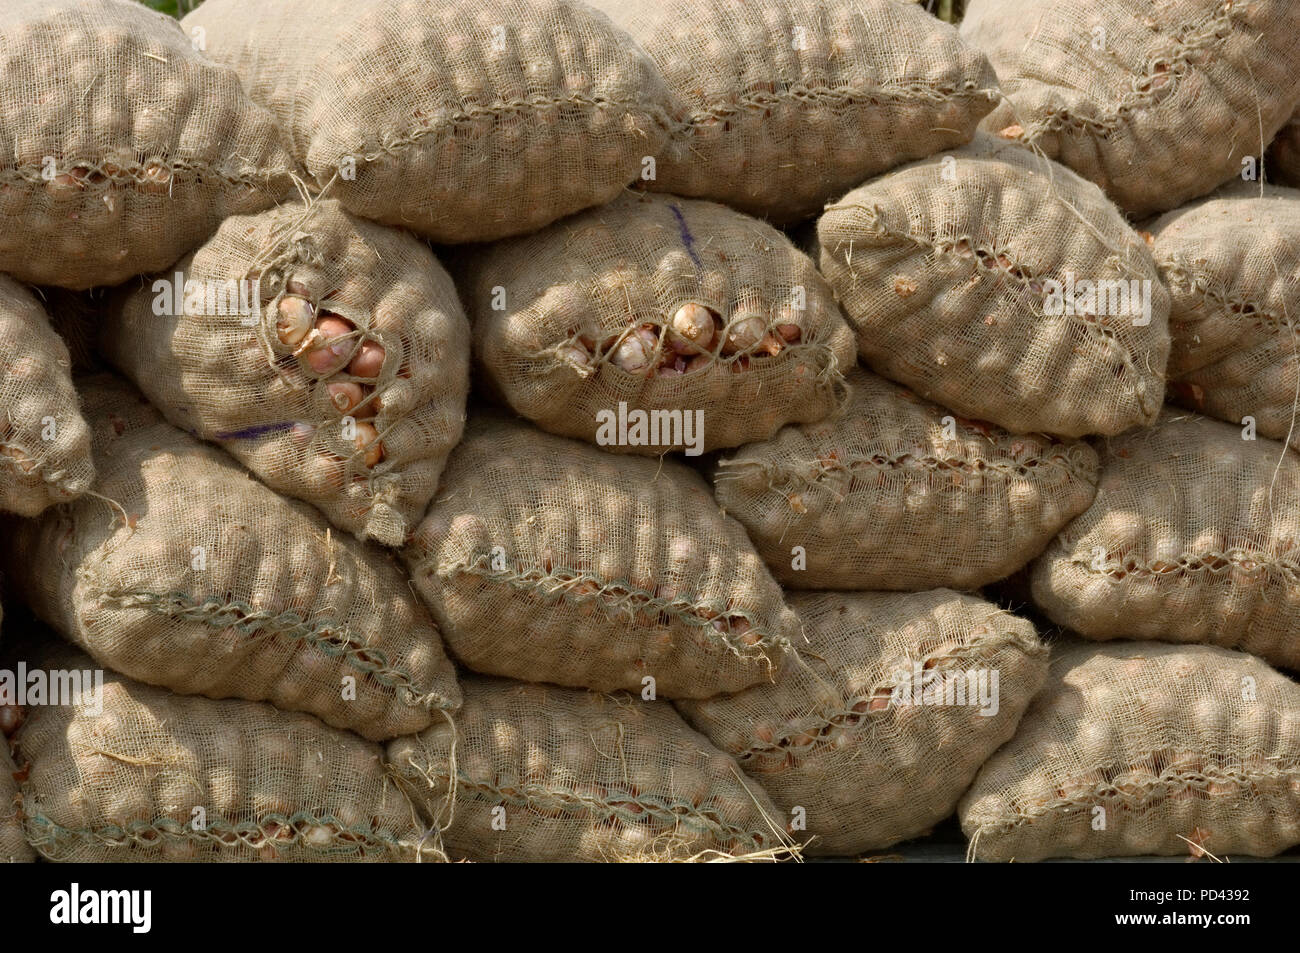 Activity of sorting & filling Onions in jute bags. Stock Photo